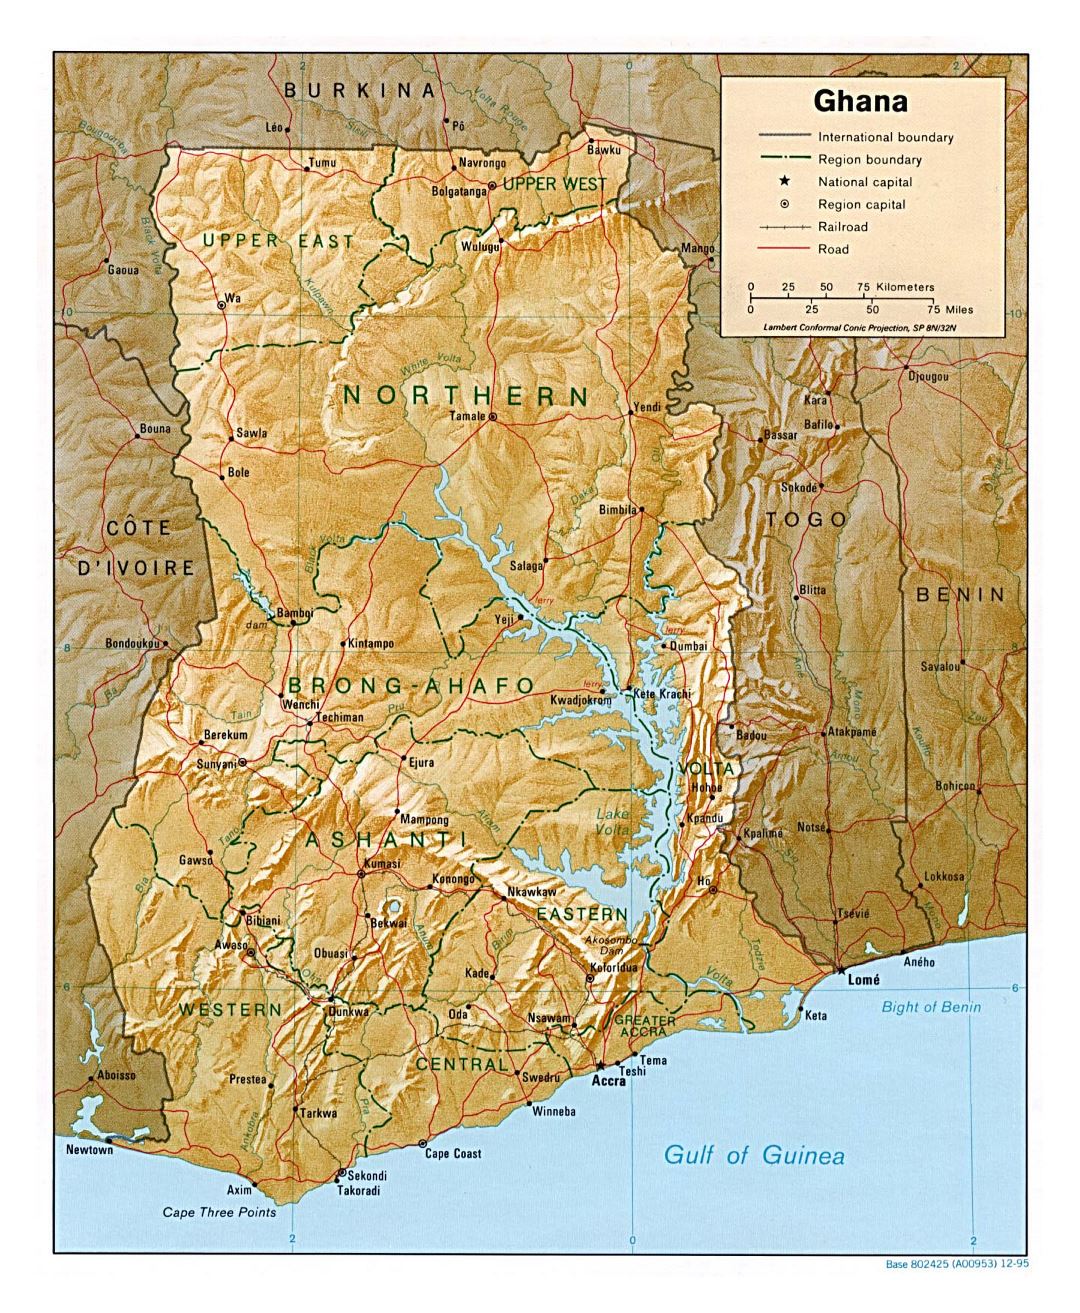 Large political and administrative map of Ghana with relief, roads, railroads and major cities - 1995